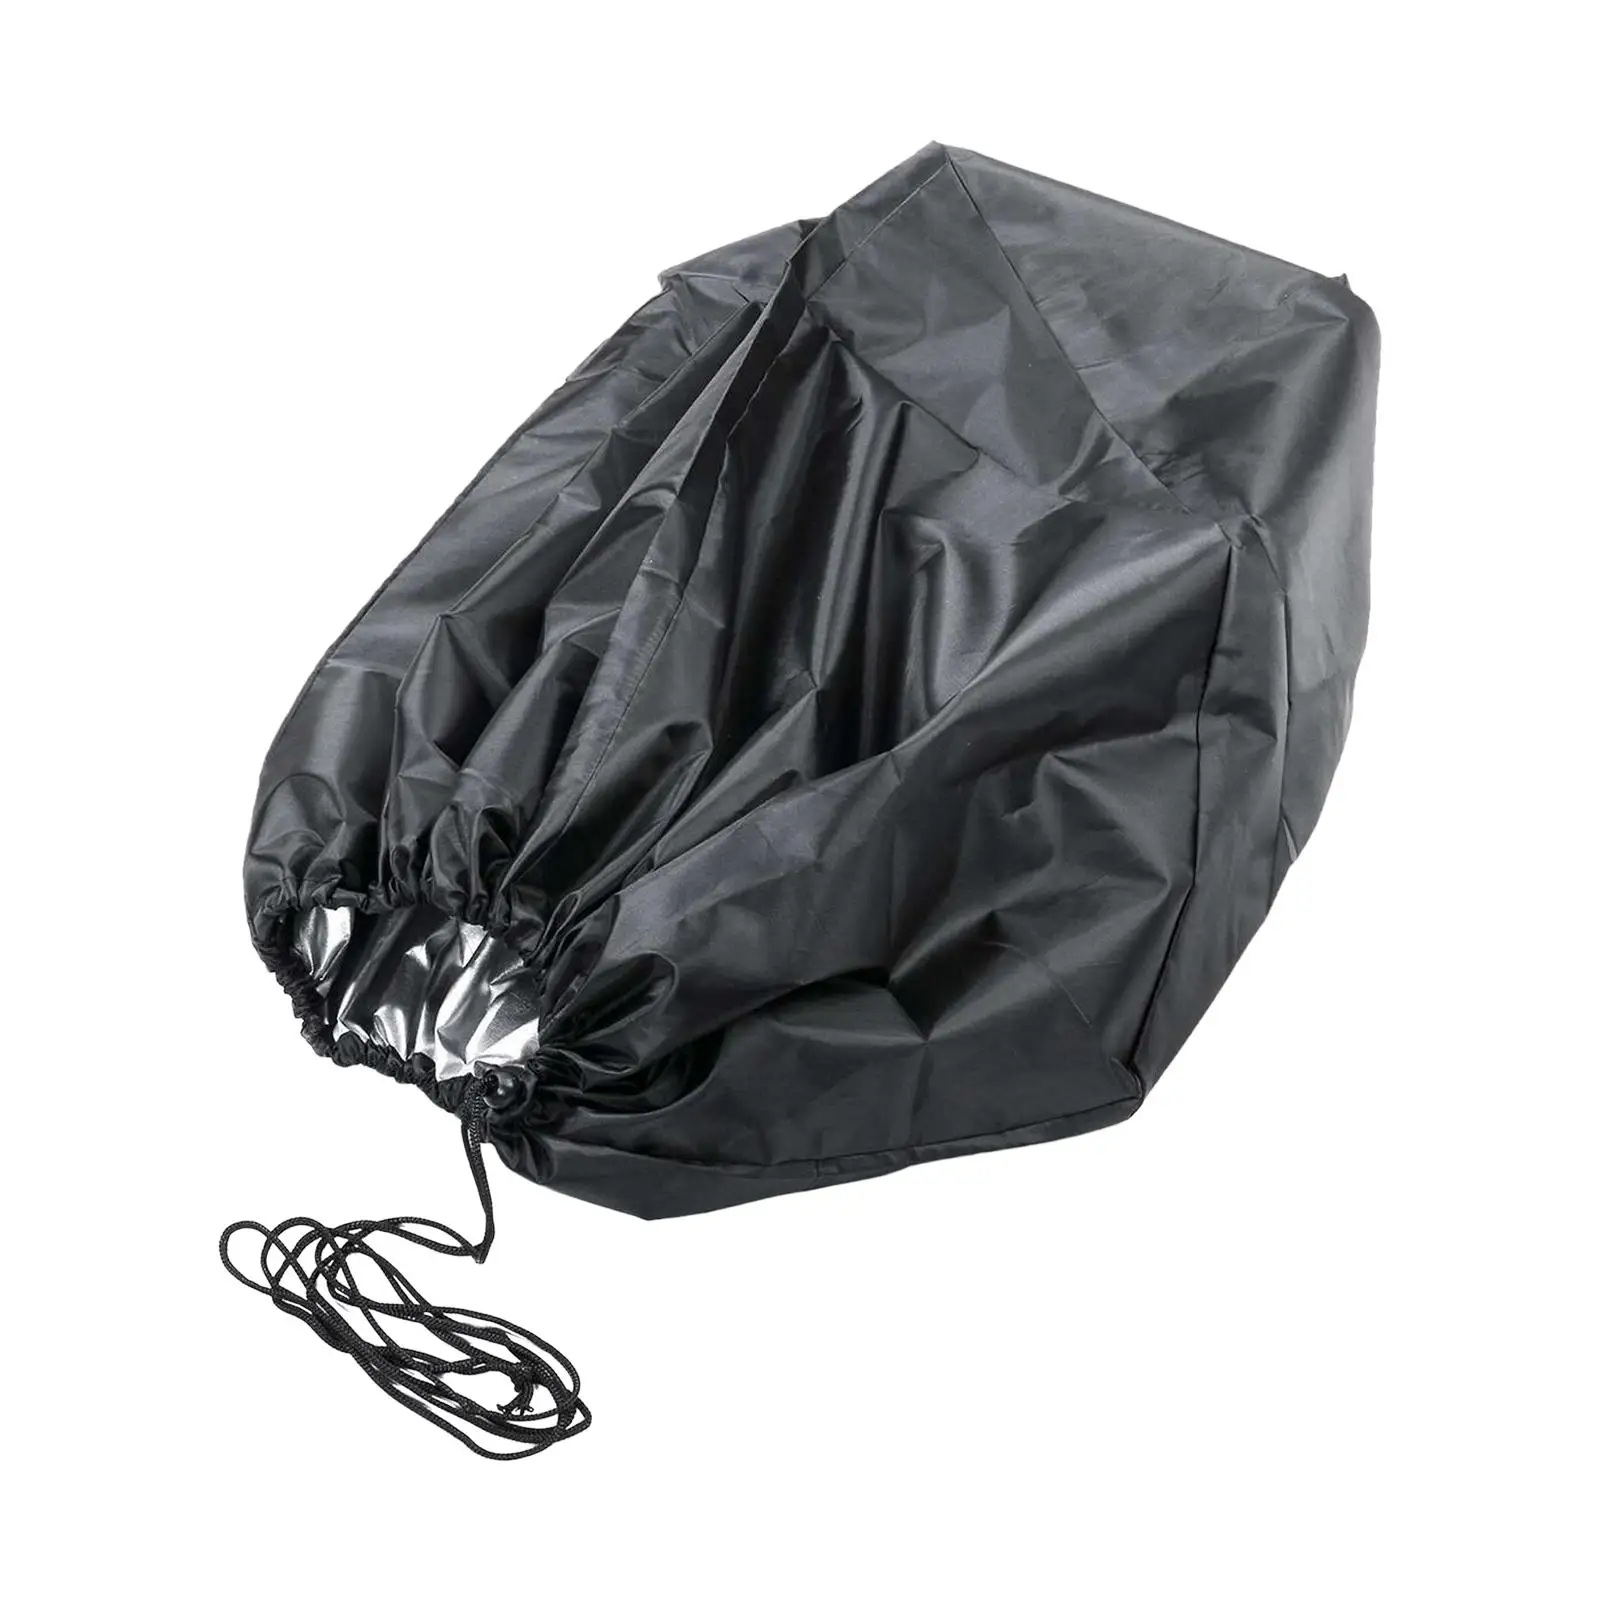 Helmsman Chair Protective Cover Folding 210D Oxford Cloth for Fishing